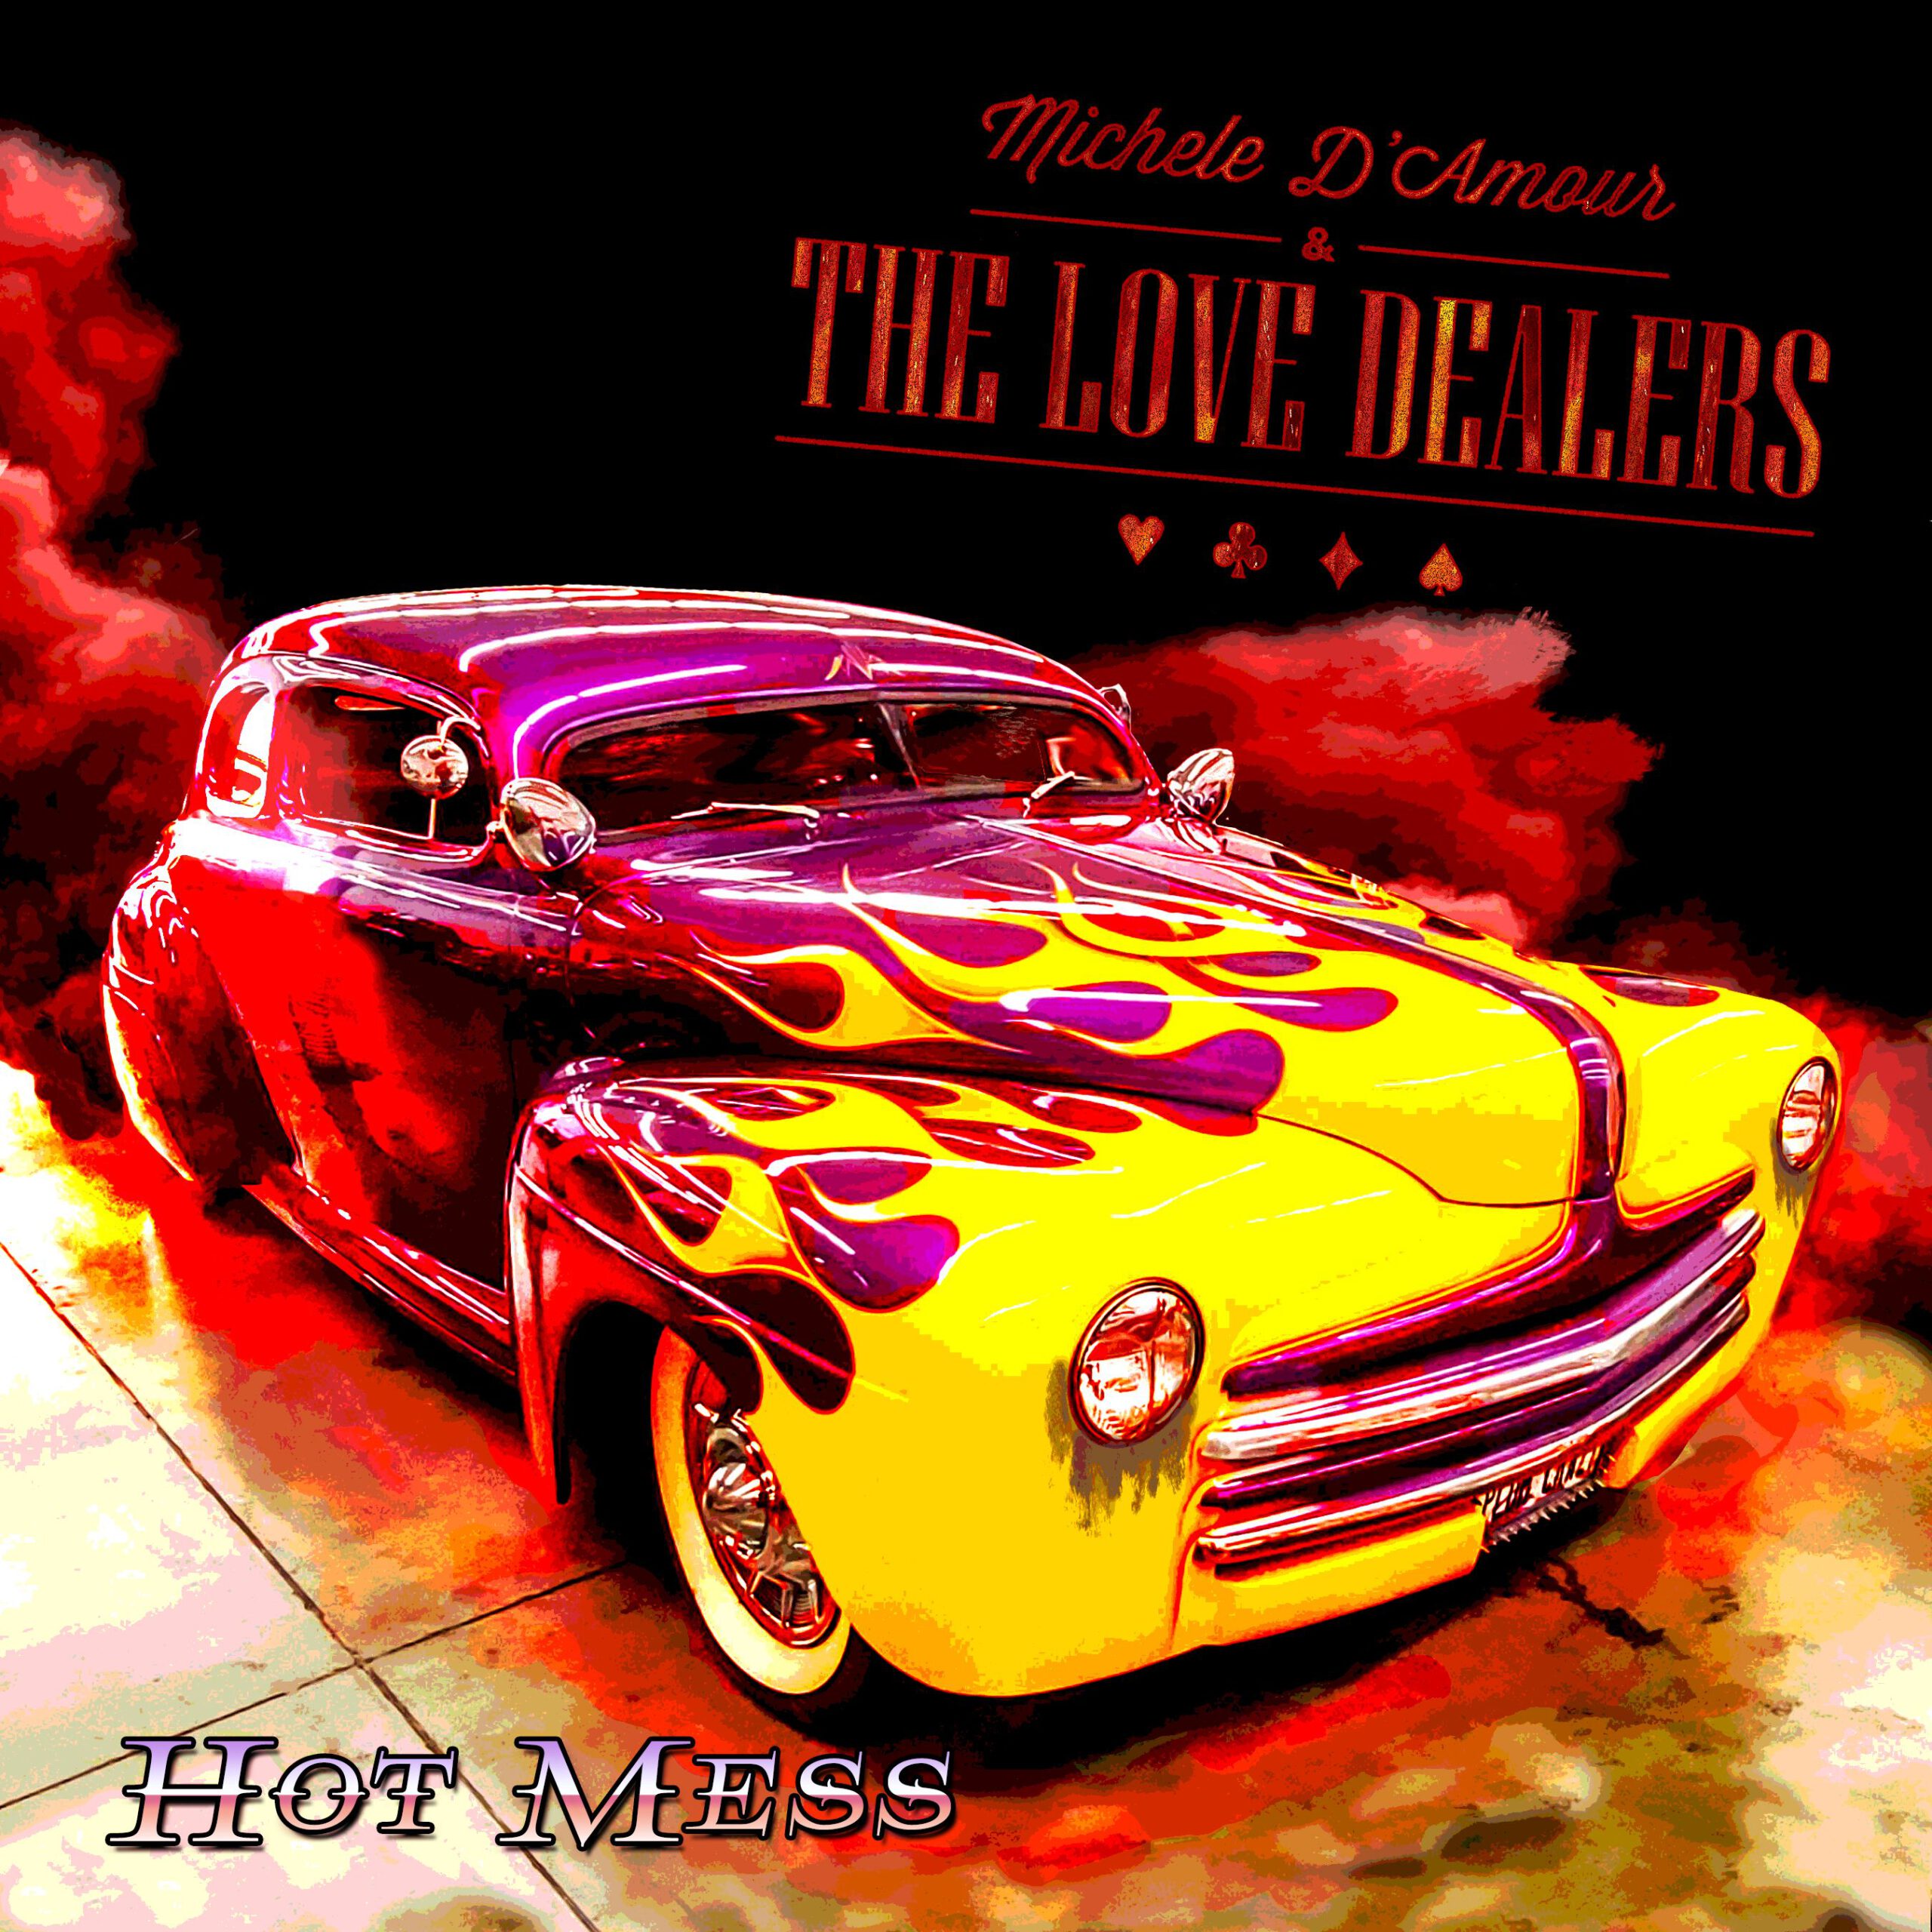 Michele D'Amour And The Love Dealers - Hot Mess